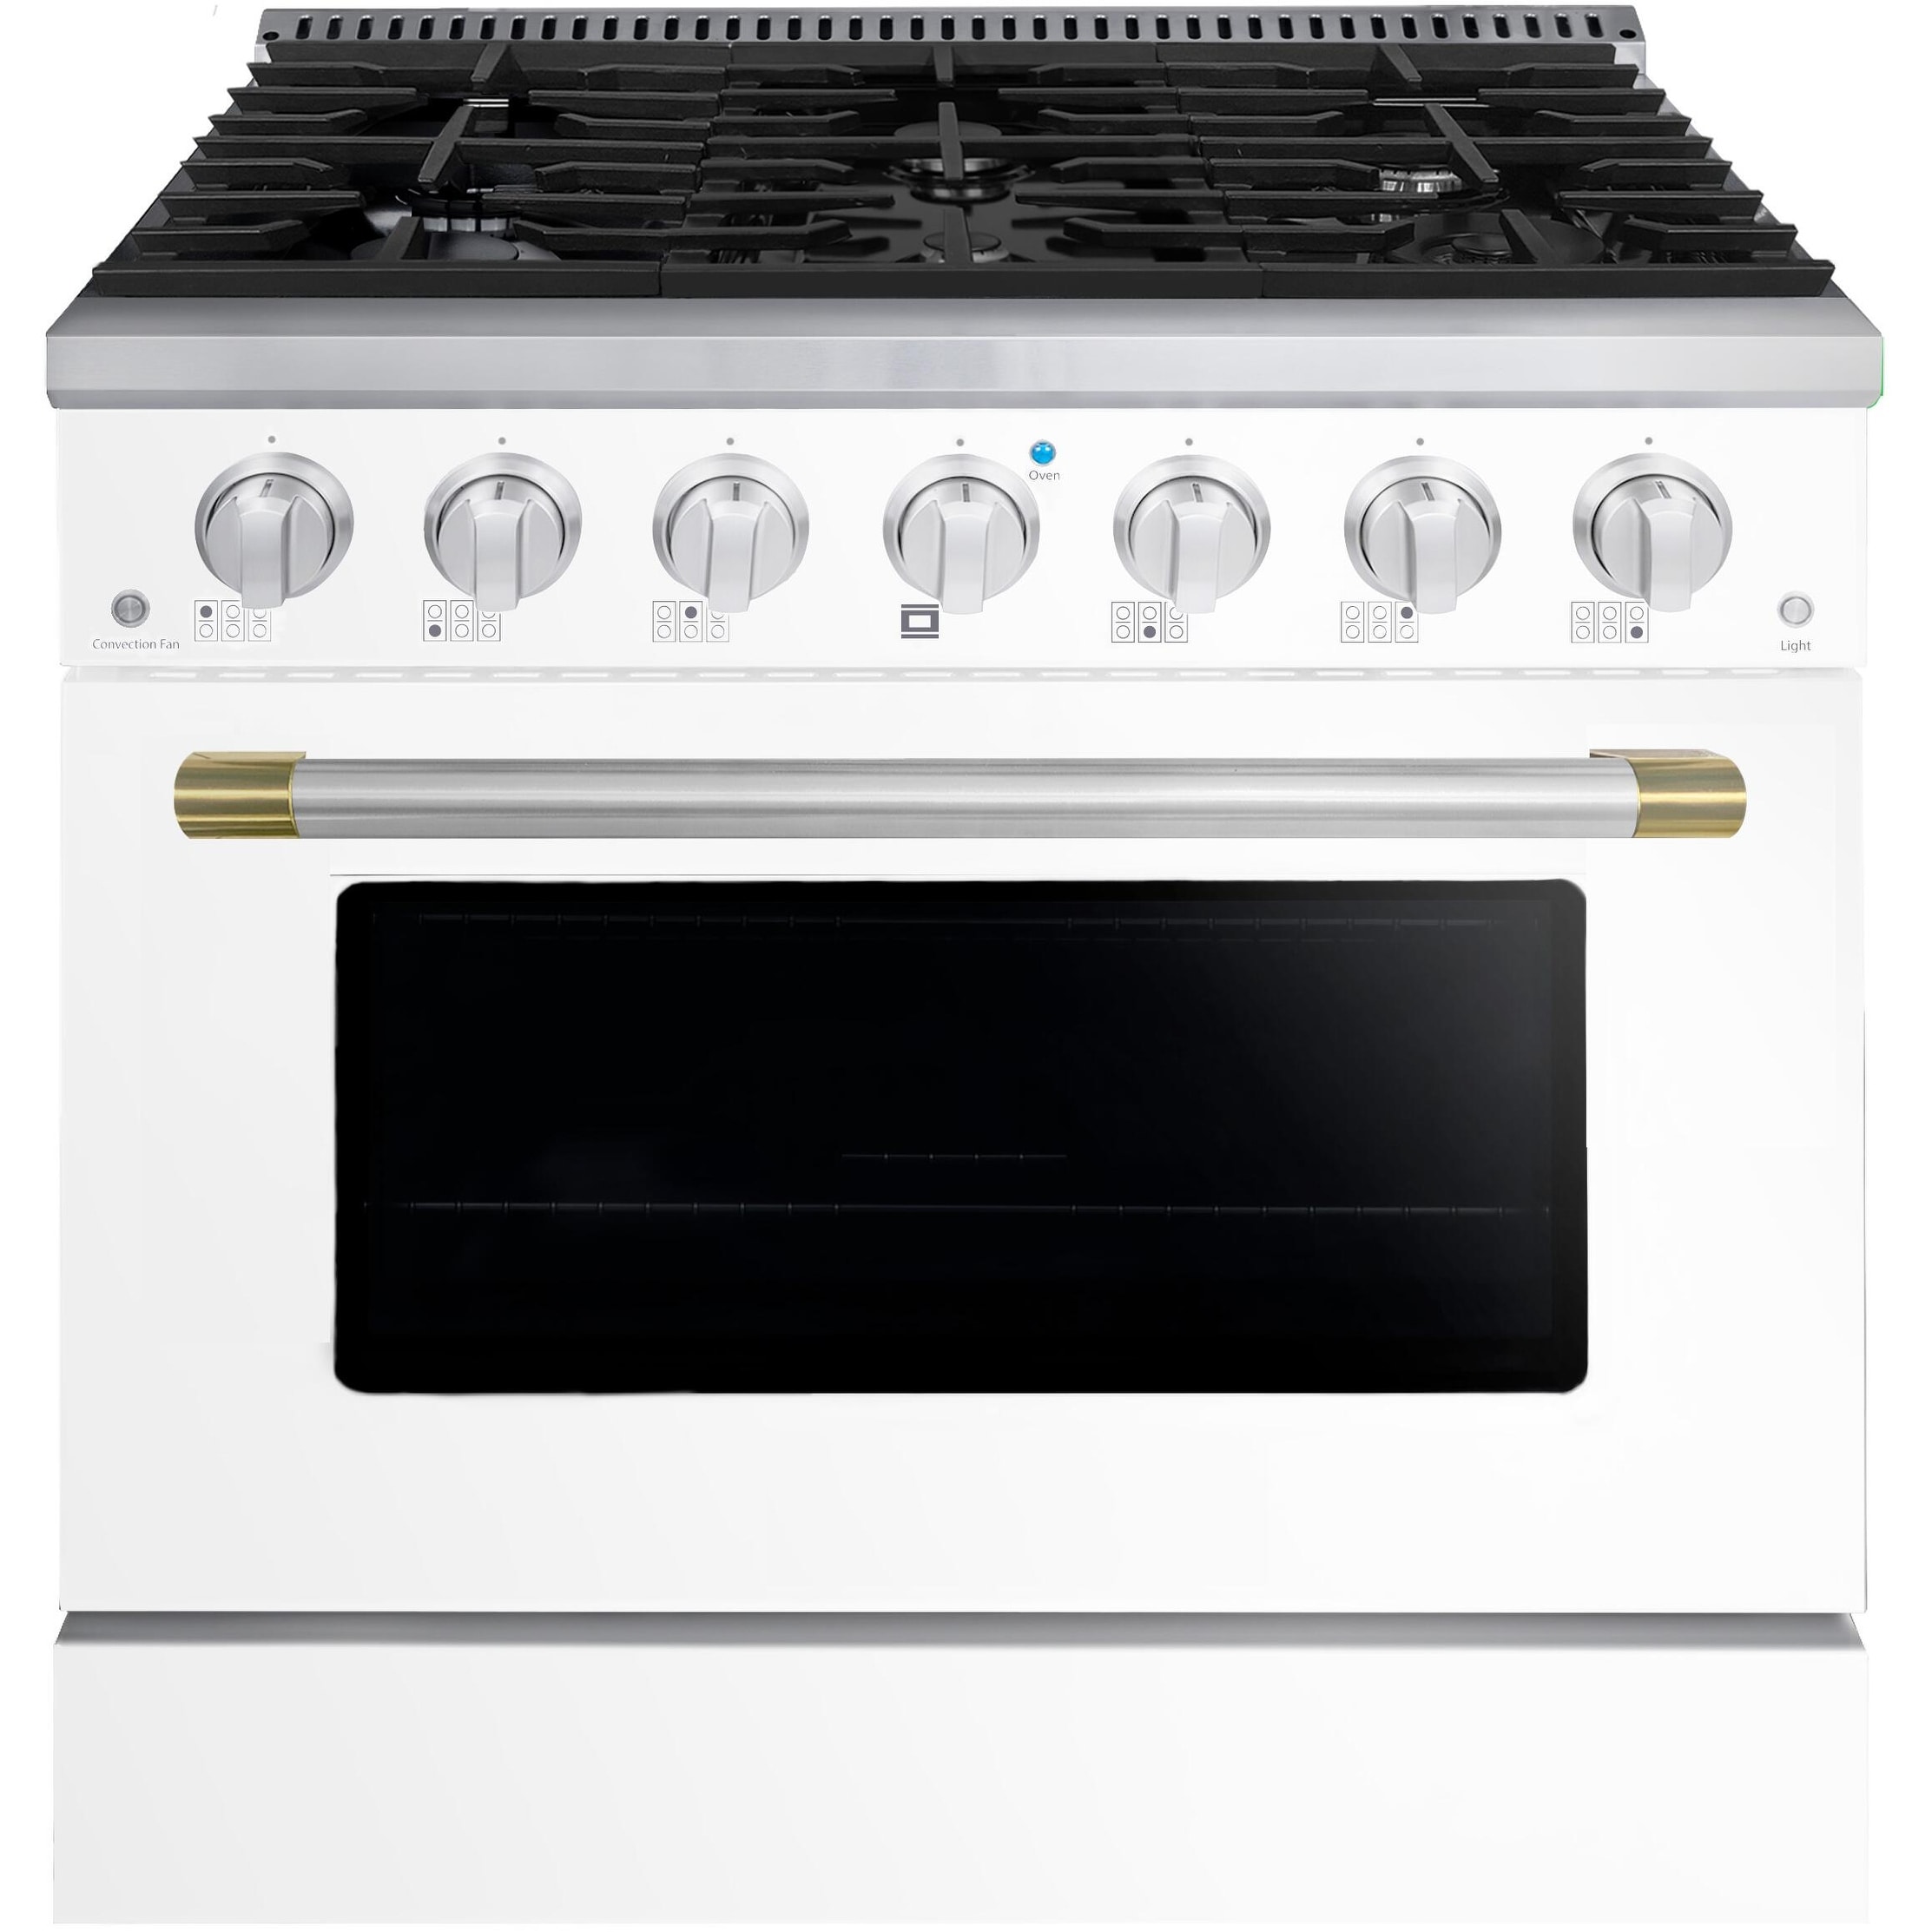 Forte 36 Inch Range in White with Stainless Steel Trim